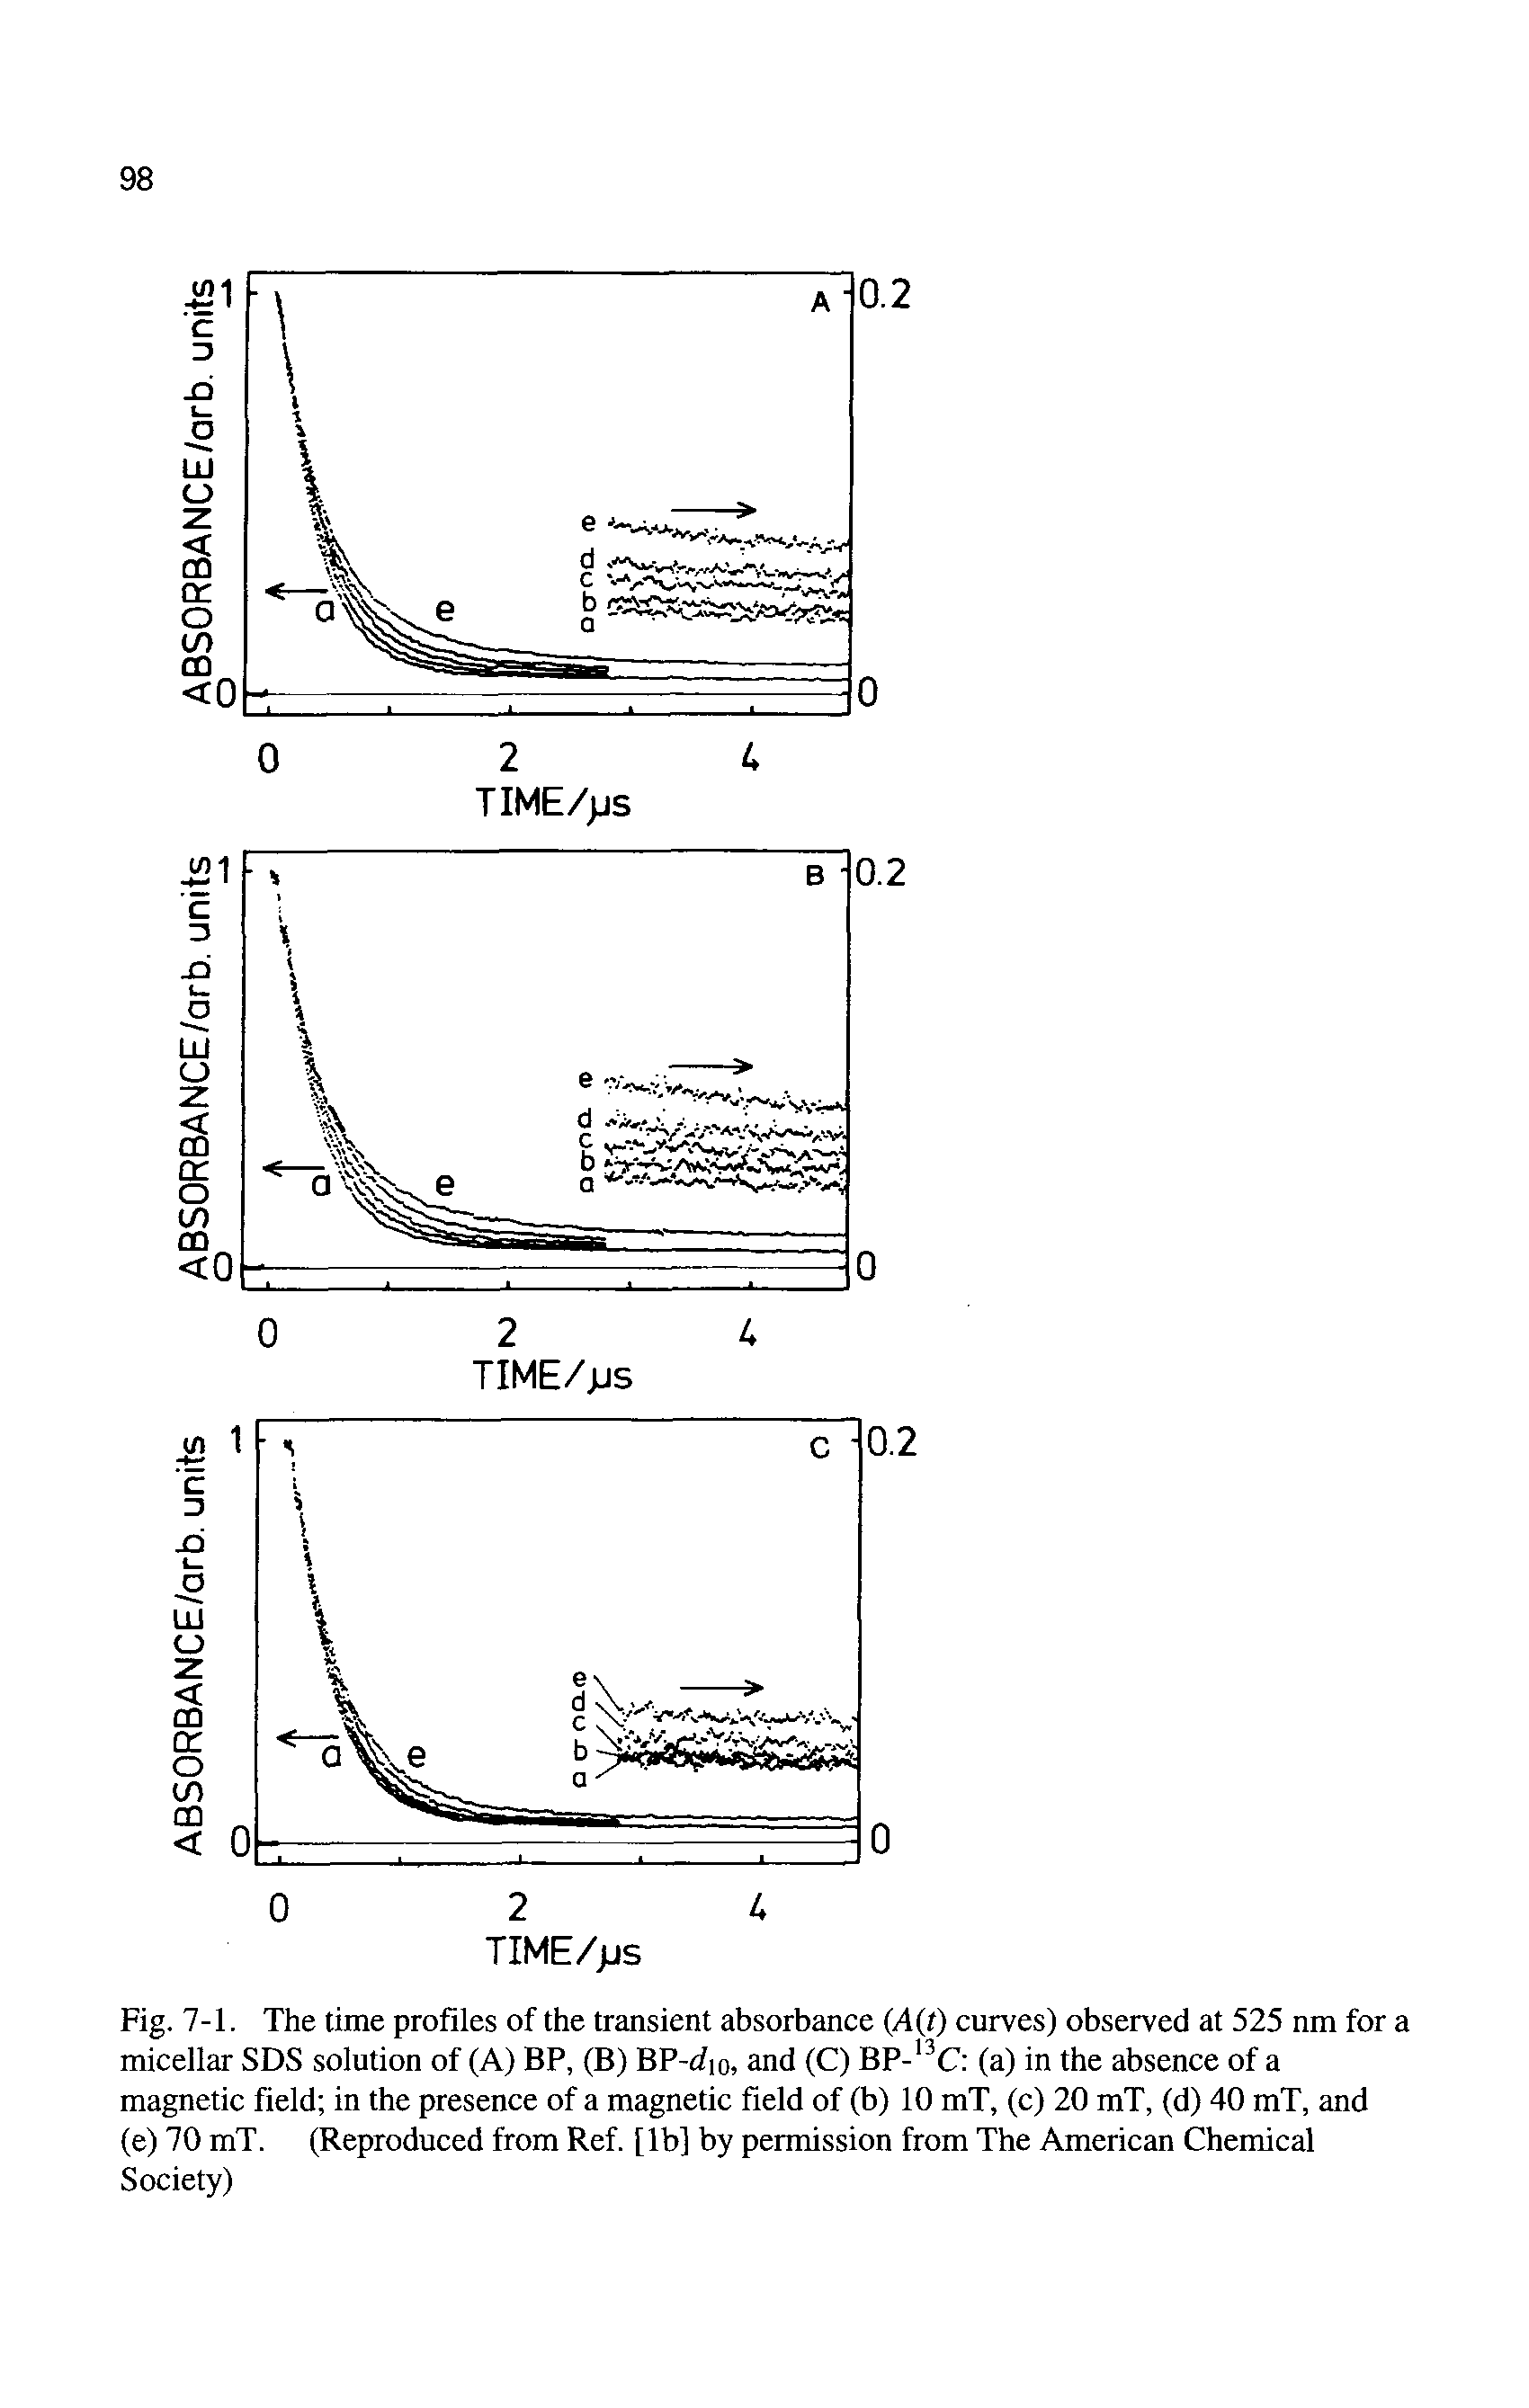 Fig. 7-1. The time profiles of the transient absorbance (A(t) curves) observed at 525 nm for a micellar SDS solution of (A) BP, (B) BP-cfio, and (C) BP- C (a) in the absence of a magnetic field in the presence of a magnetic field of (b) 10 mT, (c) 20 mT, (d) 40 mT, and (e) 70 mT. (Reproduced from Ref. [lb] by permission from The American Chemical Society)...